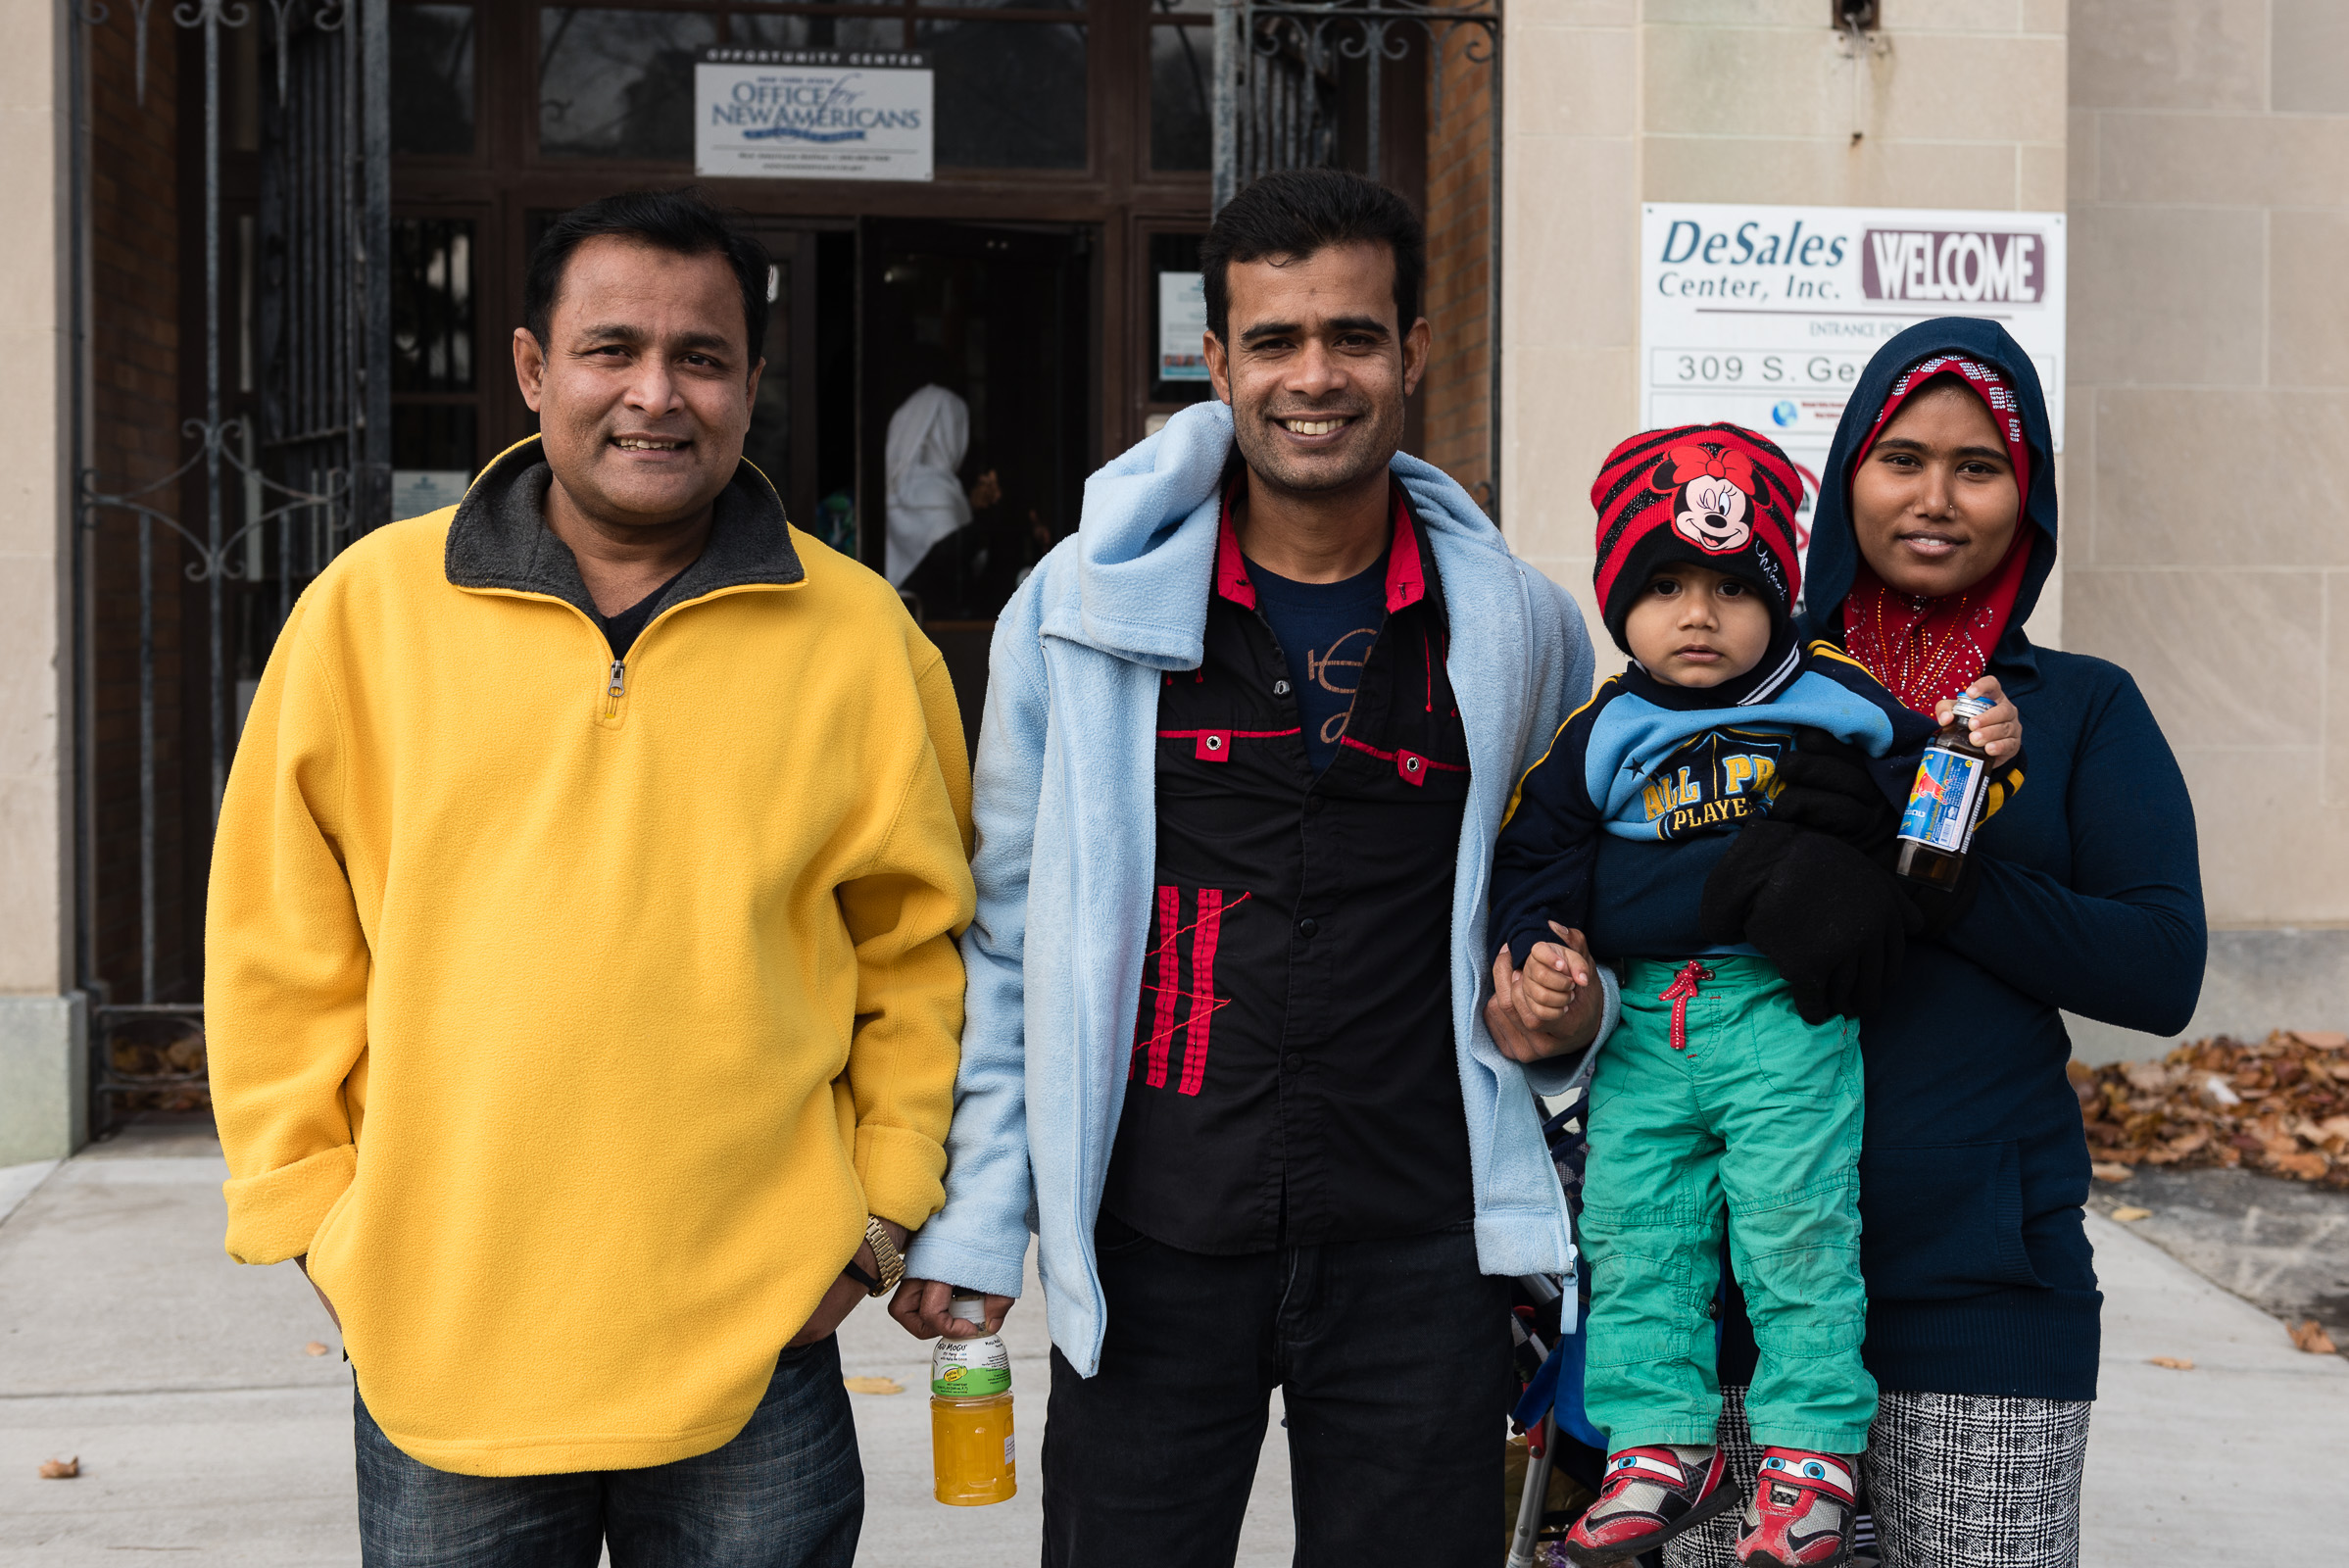   Nor Kalimullah (center) stands with his friend Abdul Alim (left) and Alim’s wife and child, Jaura and Abdul (right), outside the entrance to the Mohawk Valley Resource Center for Refugees in Utica, New York.&nbsp; Joseph Ryder   